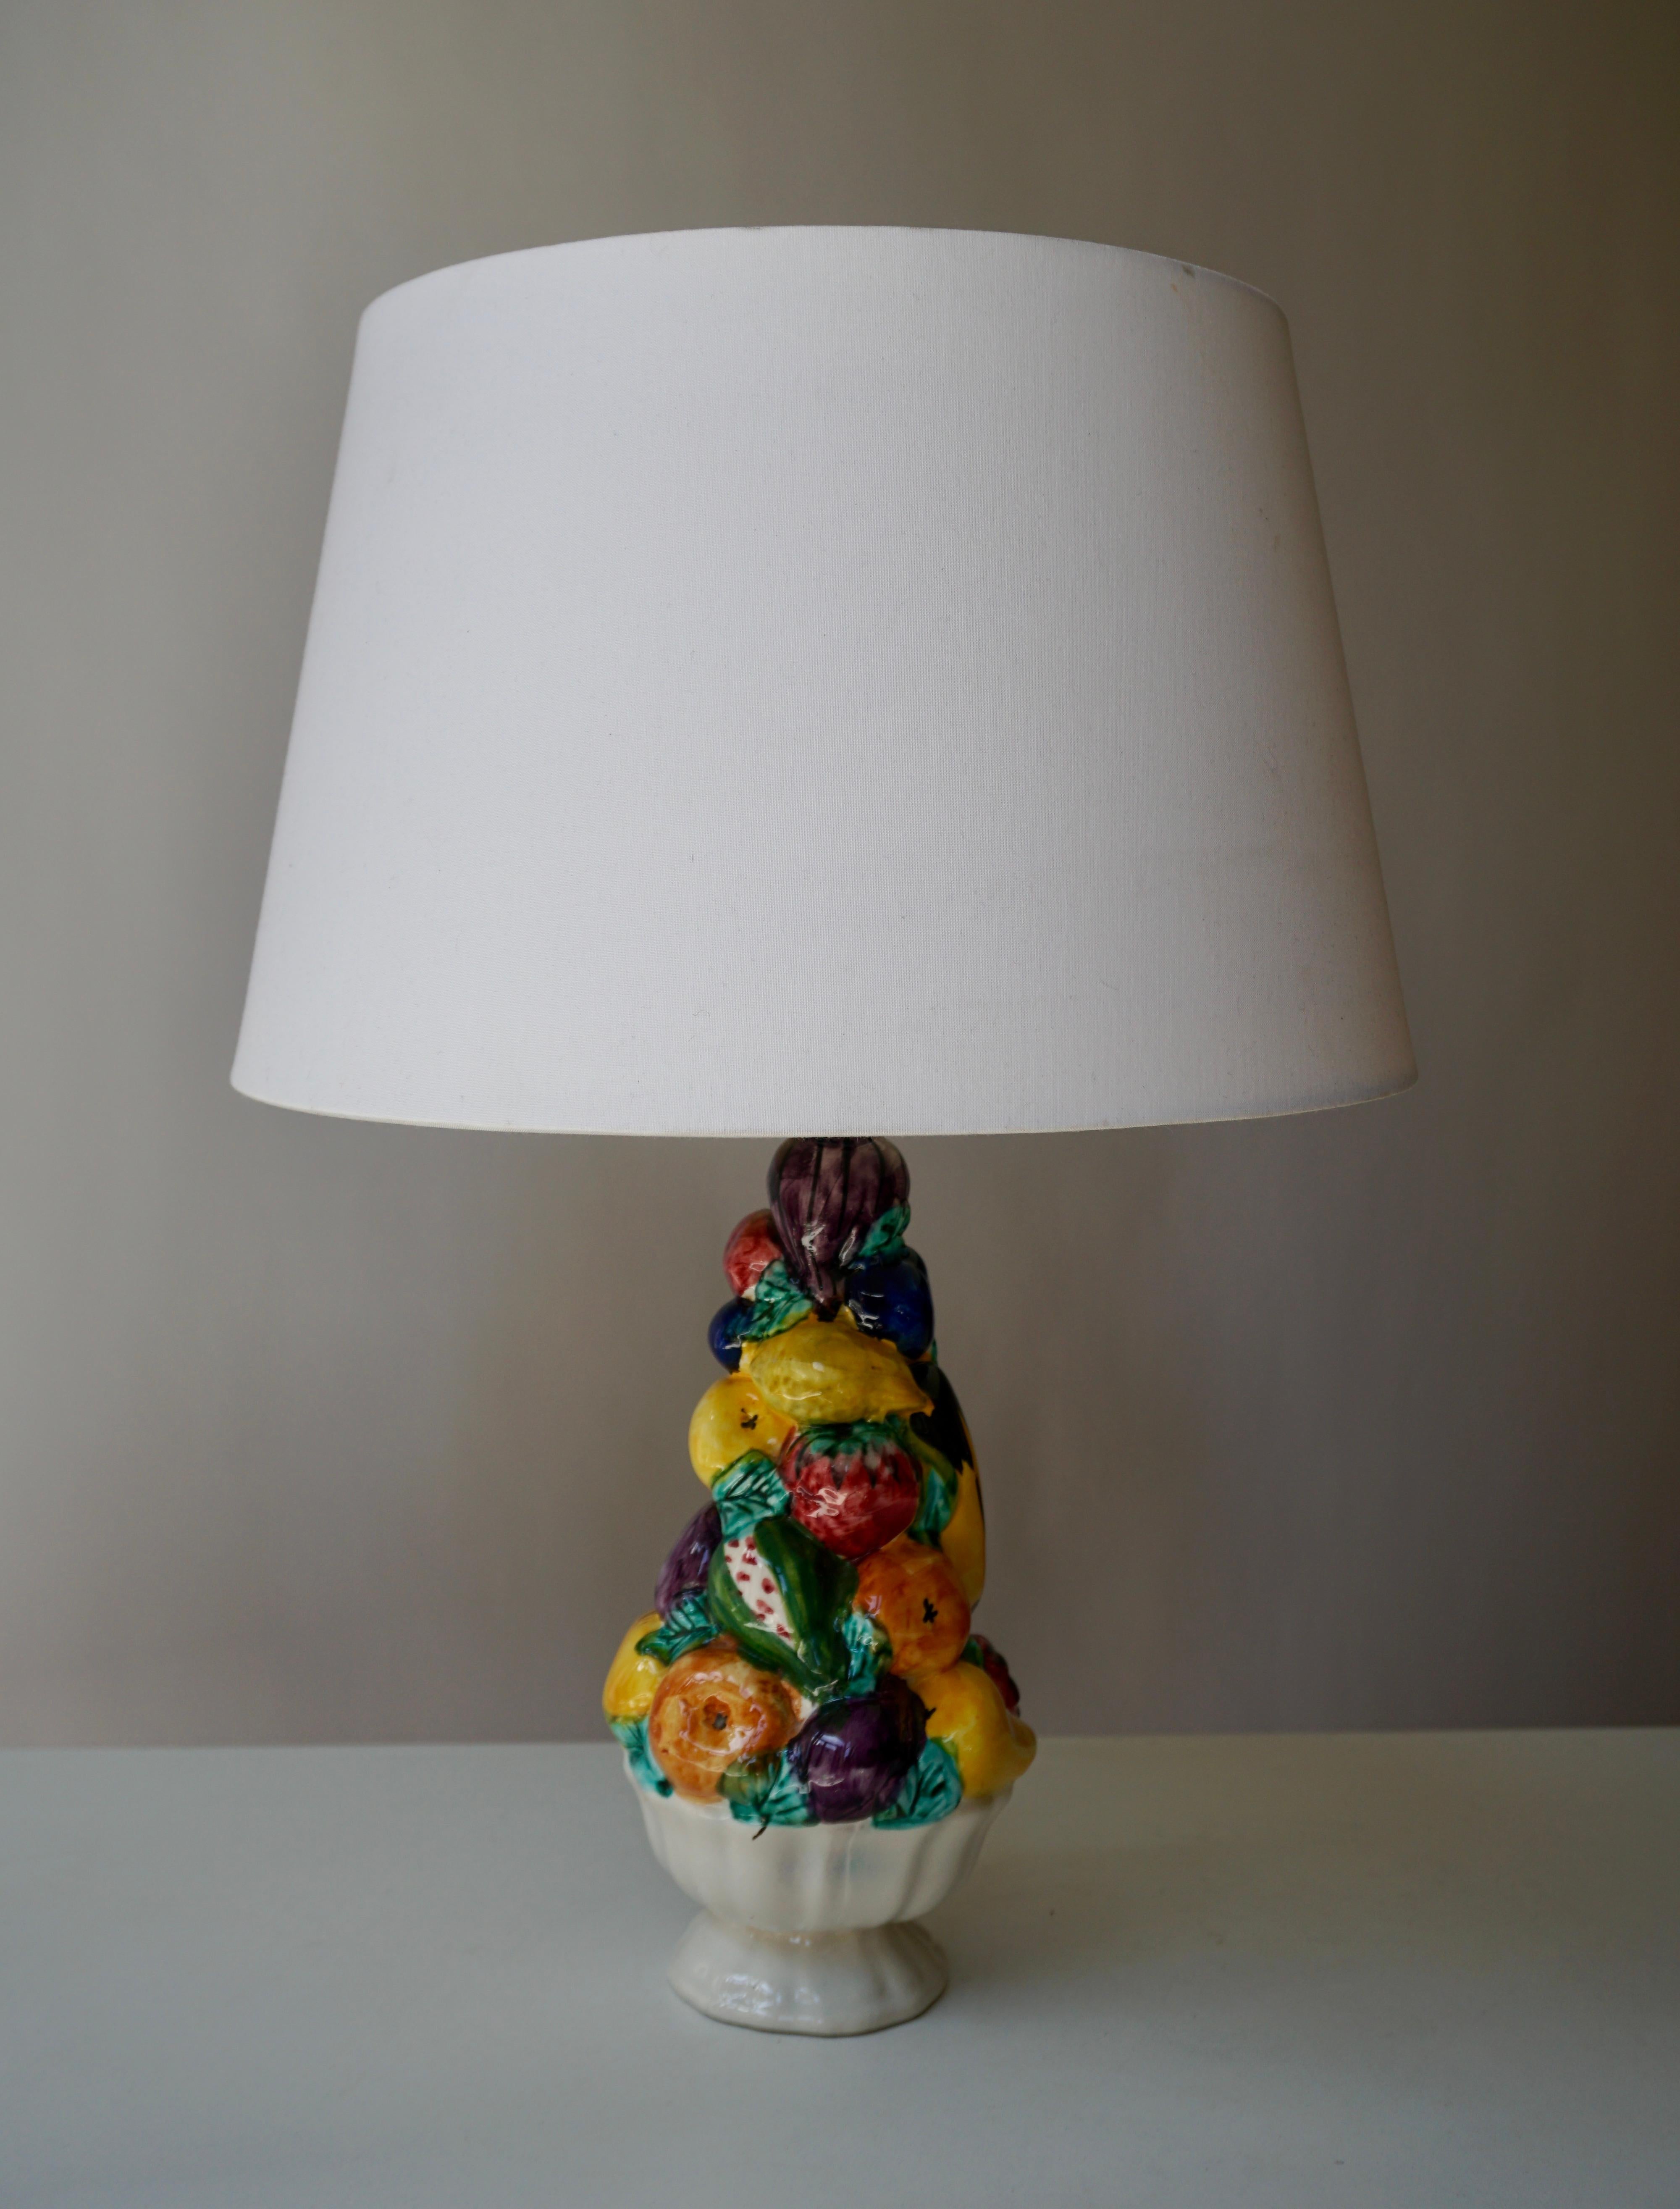 Vintage, hand thrown Italian San Marino pottery table lamp, circa 1960s. San Marino is a tiny independent republic within Italy similar to the Vatican. This is a piece with many of the hallmarks of great 1960s Italian pottery, lava glaze,